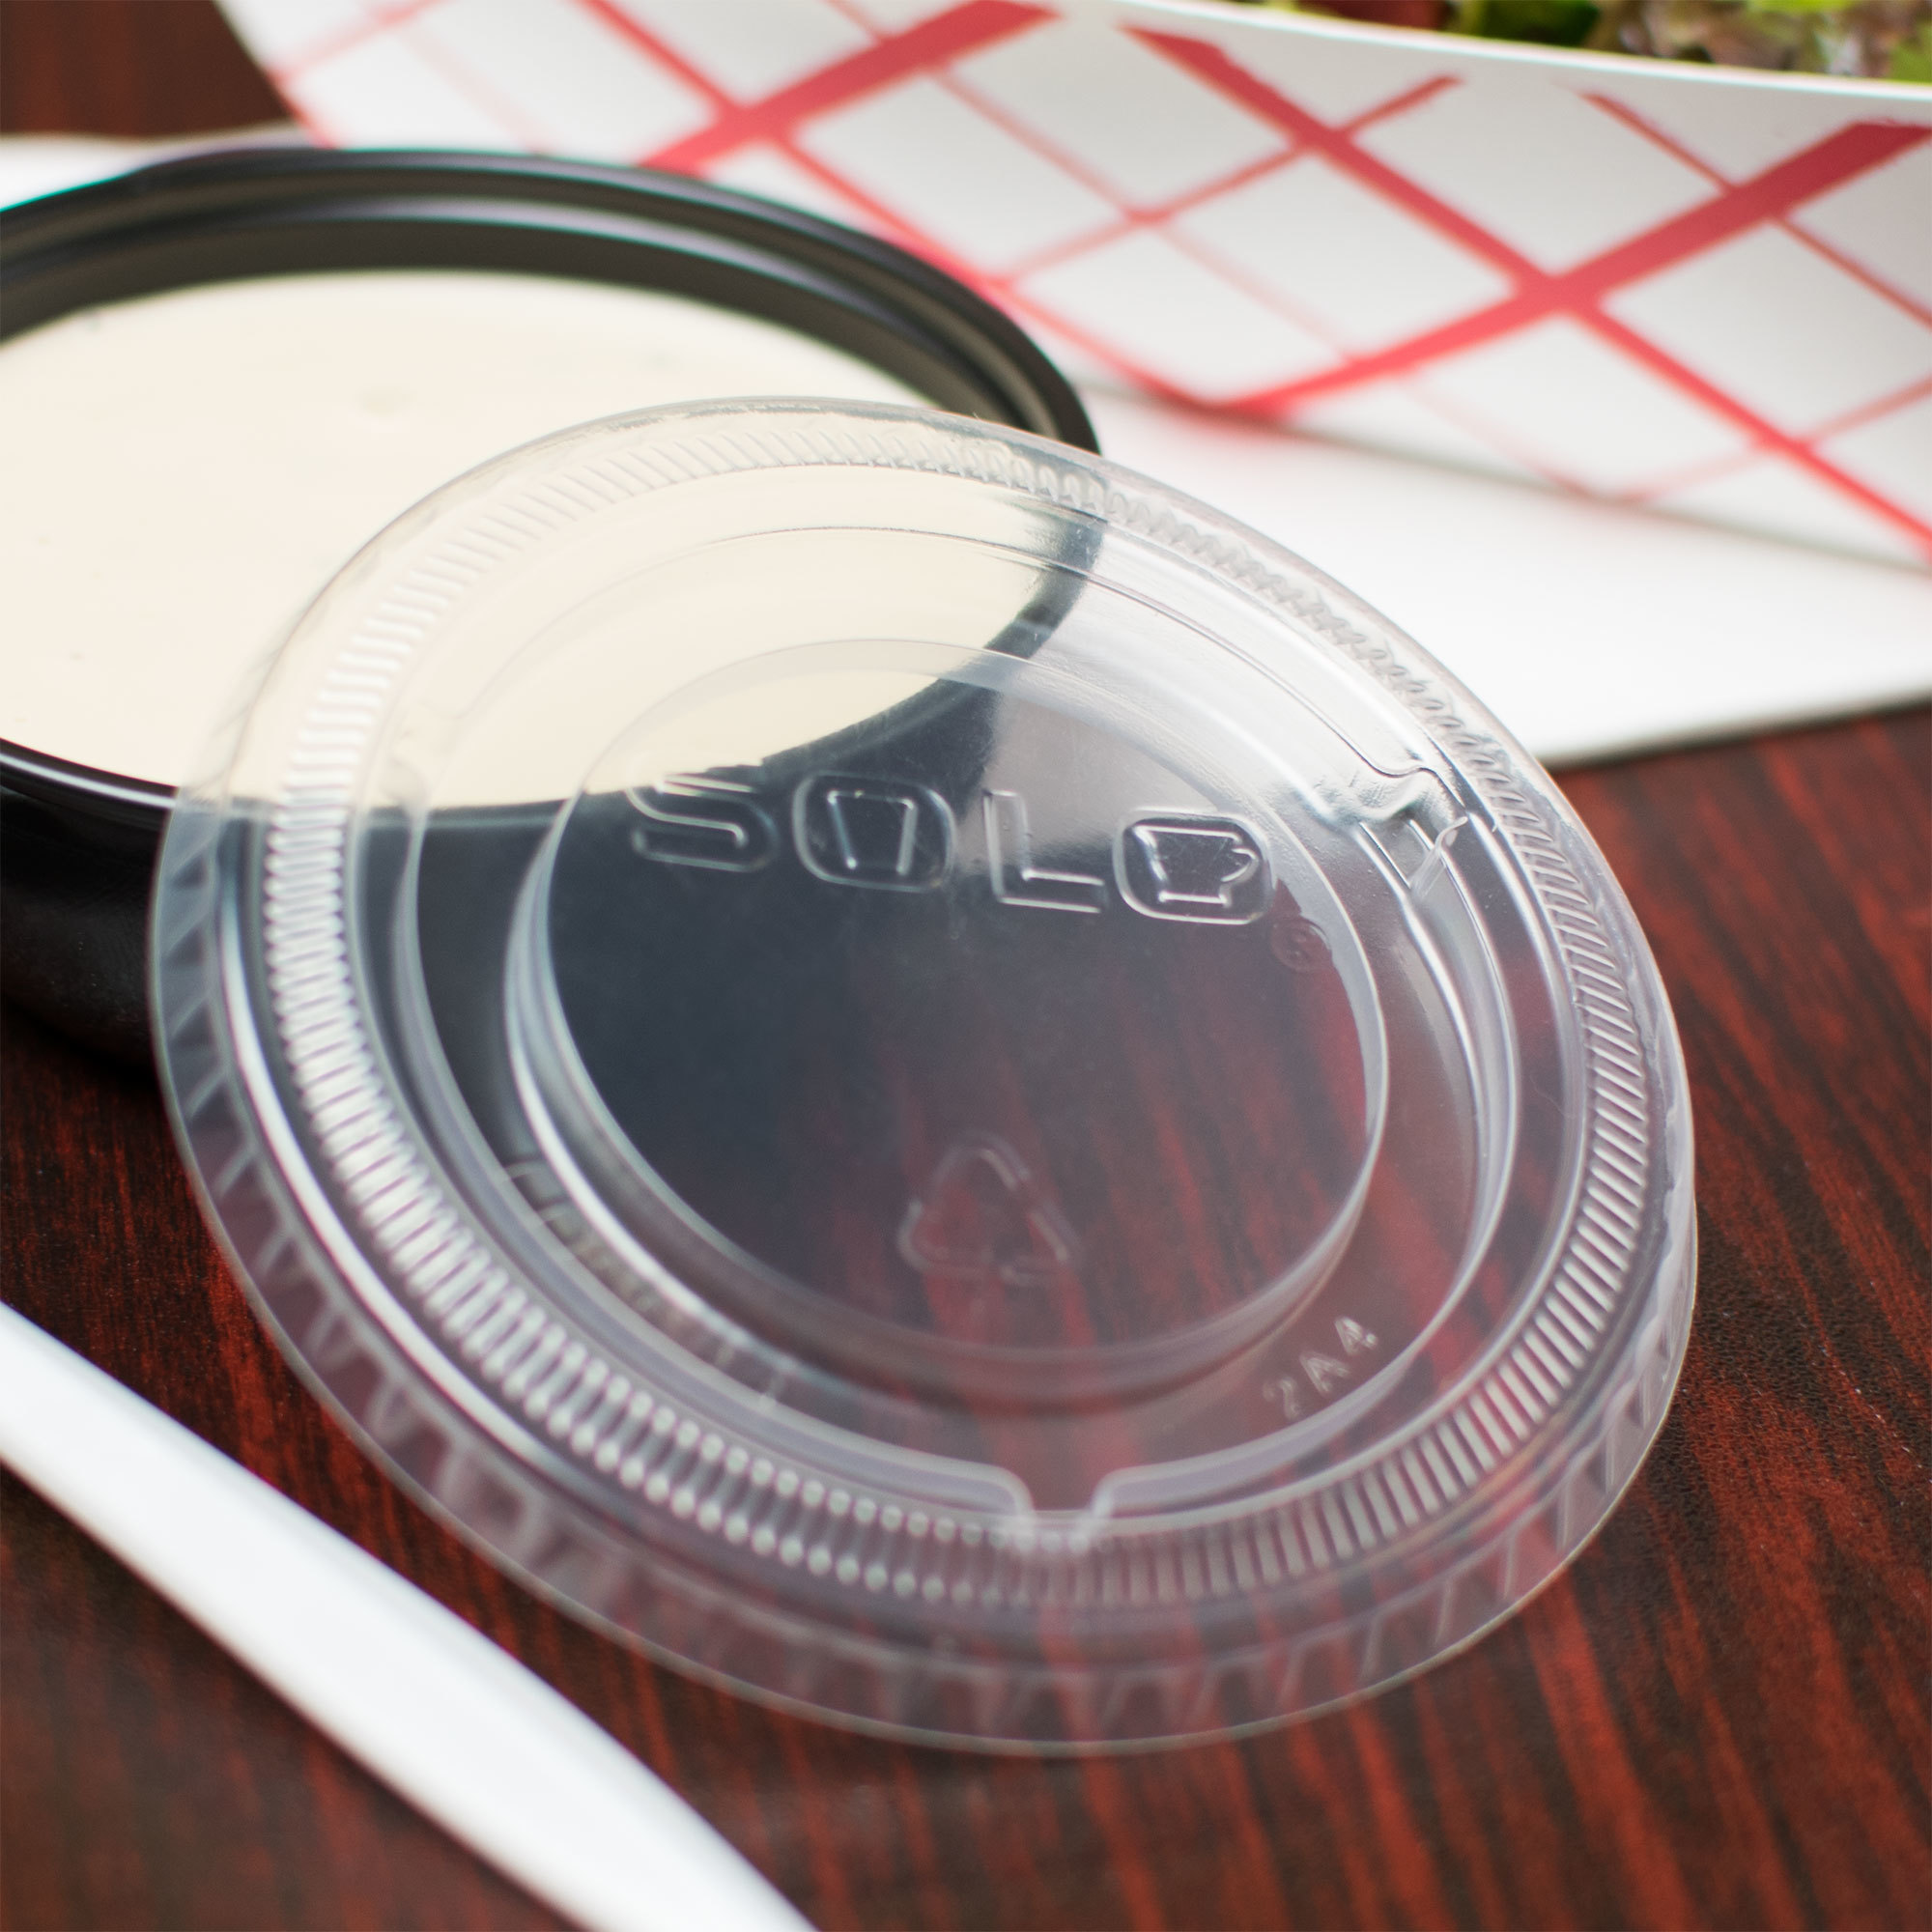 Solo Paper Snack Bowl To Go With Lids, Bowls